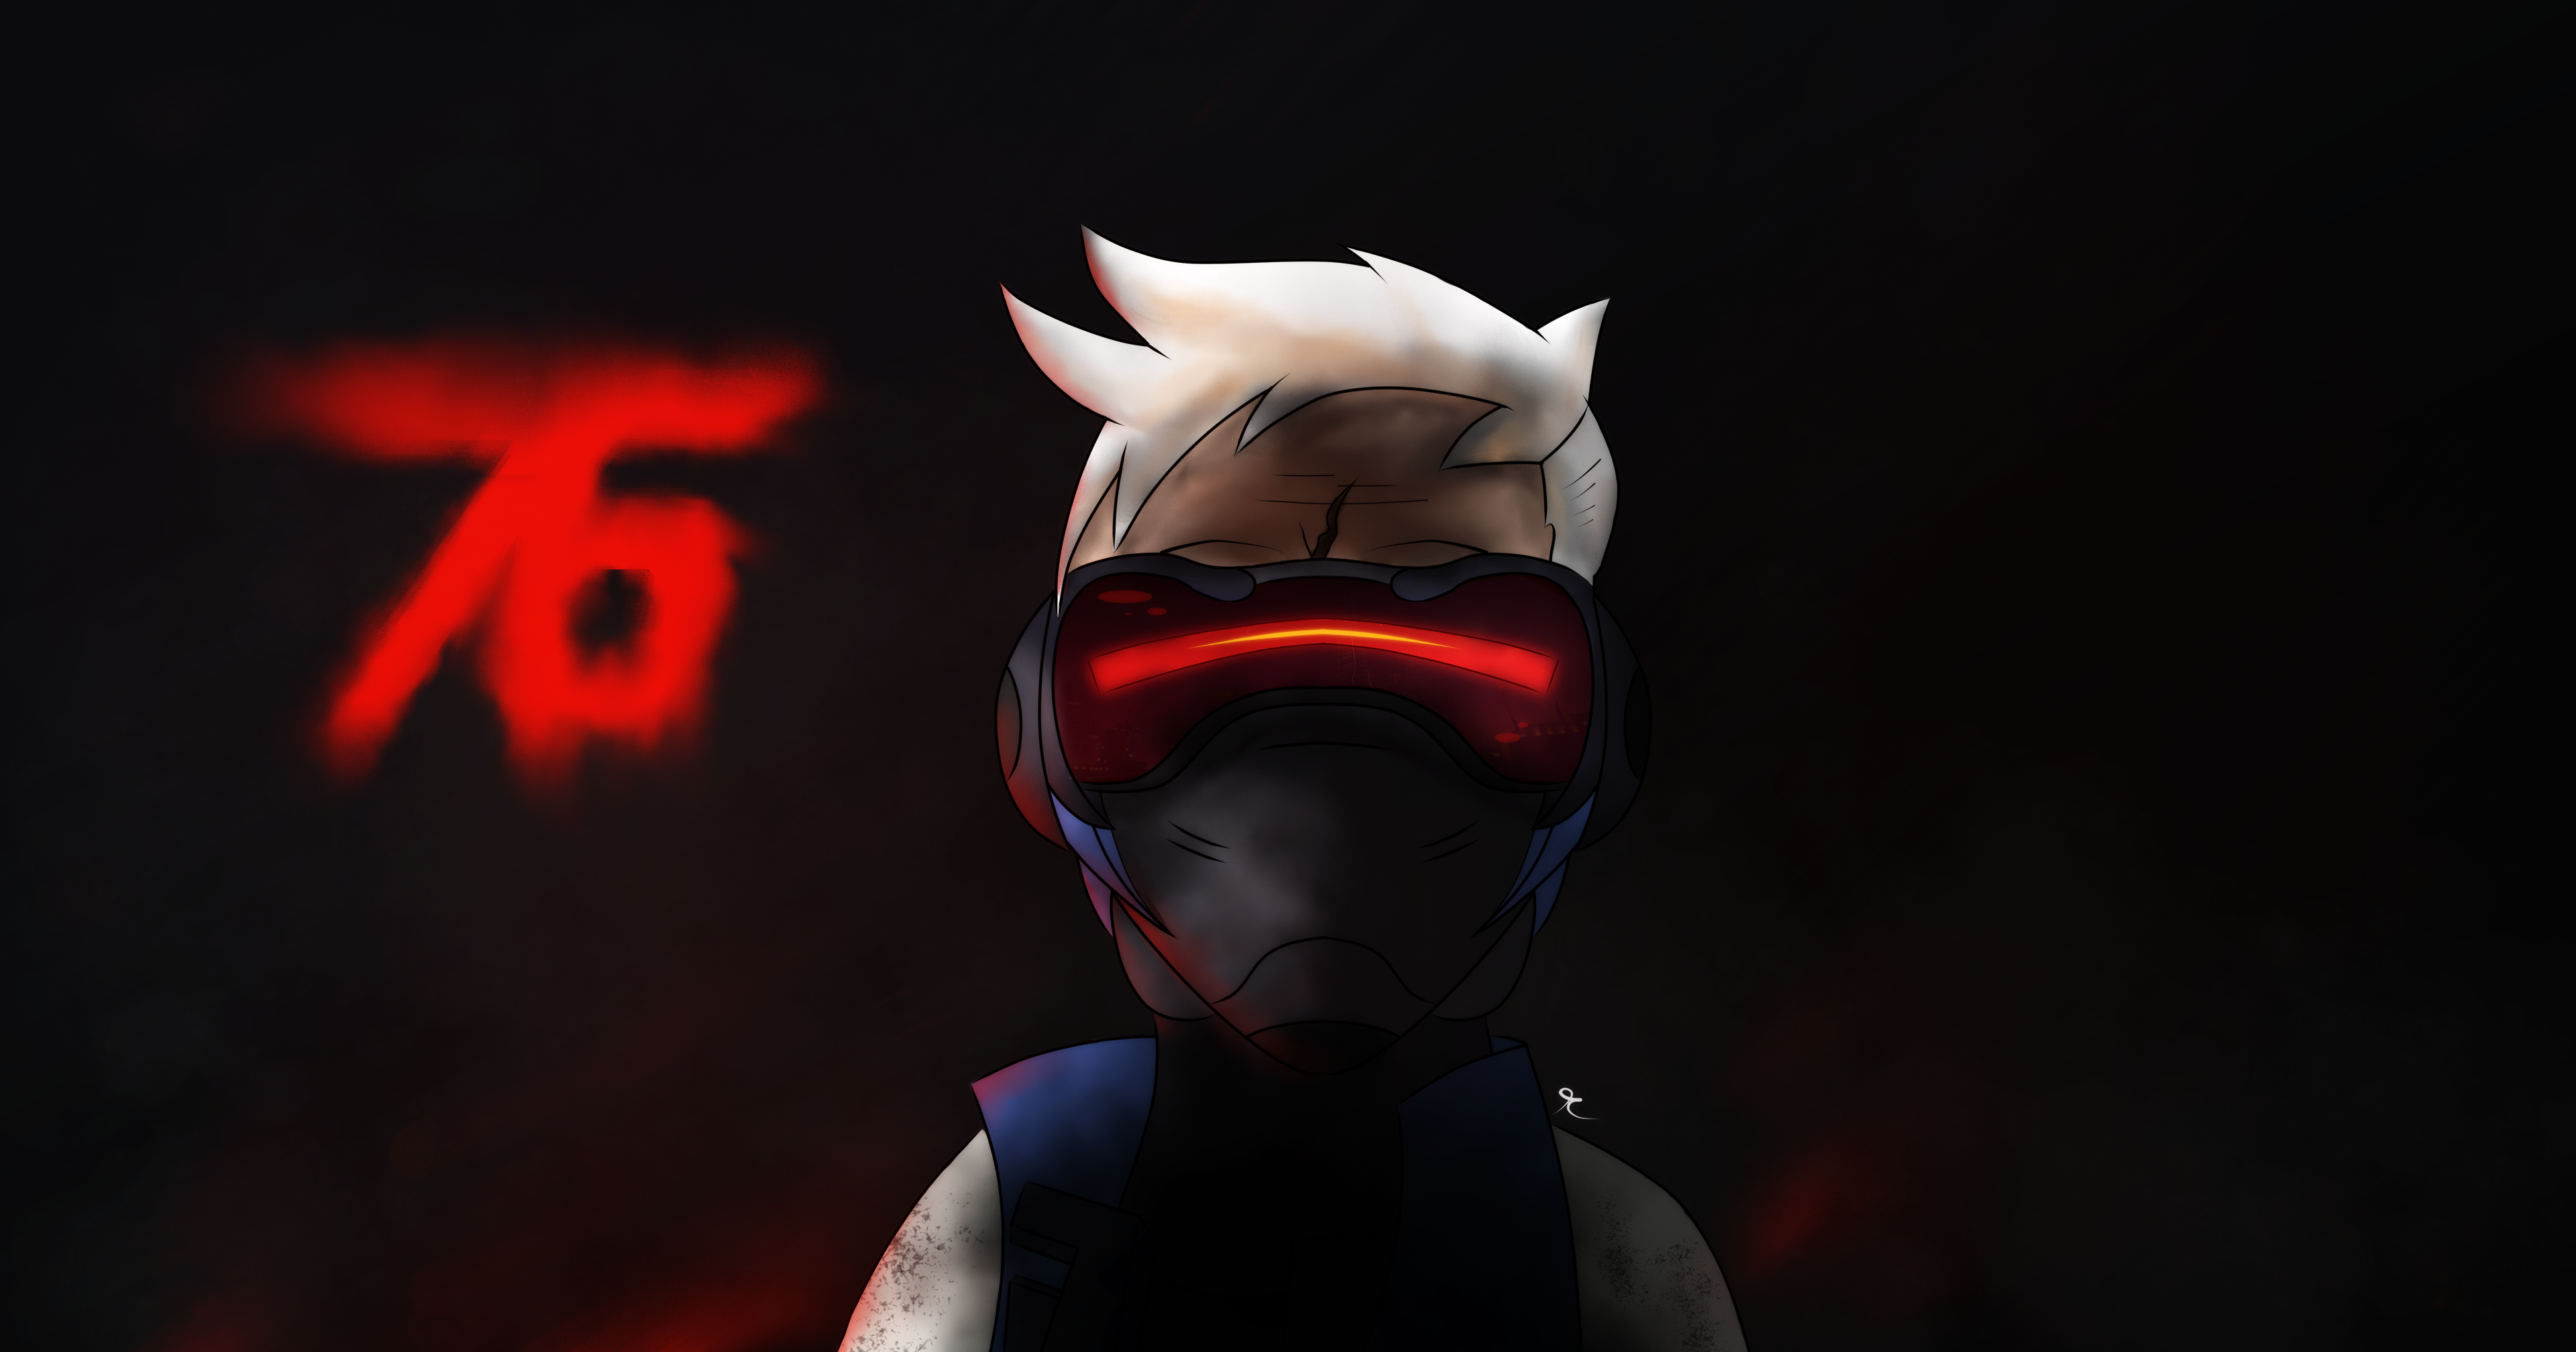 The Old Dog Soldier 76 Wallpaper - Pc Game - HD Wallpaper 